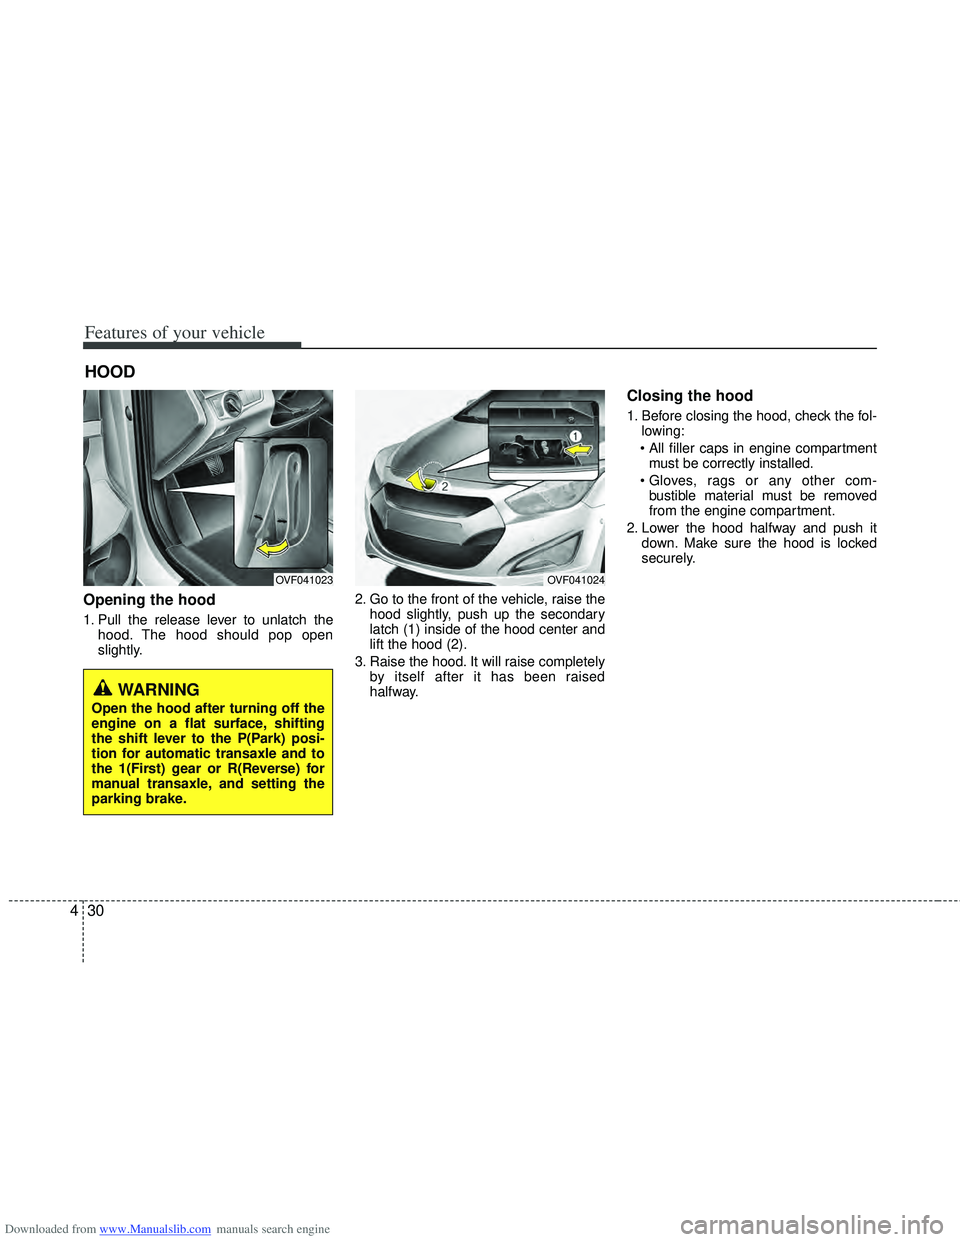 HYUNDAI I40 2011  Owners Manual Downloaded from www.Manualslib.com manuals search engine Features of your vehicle
30
4
Opening the hood 
1. Pull the release lever to unlatch the
hood. The hood should pop open
slightly. 2. Go to the 